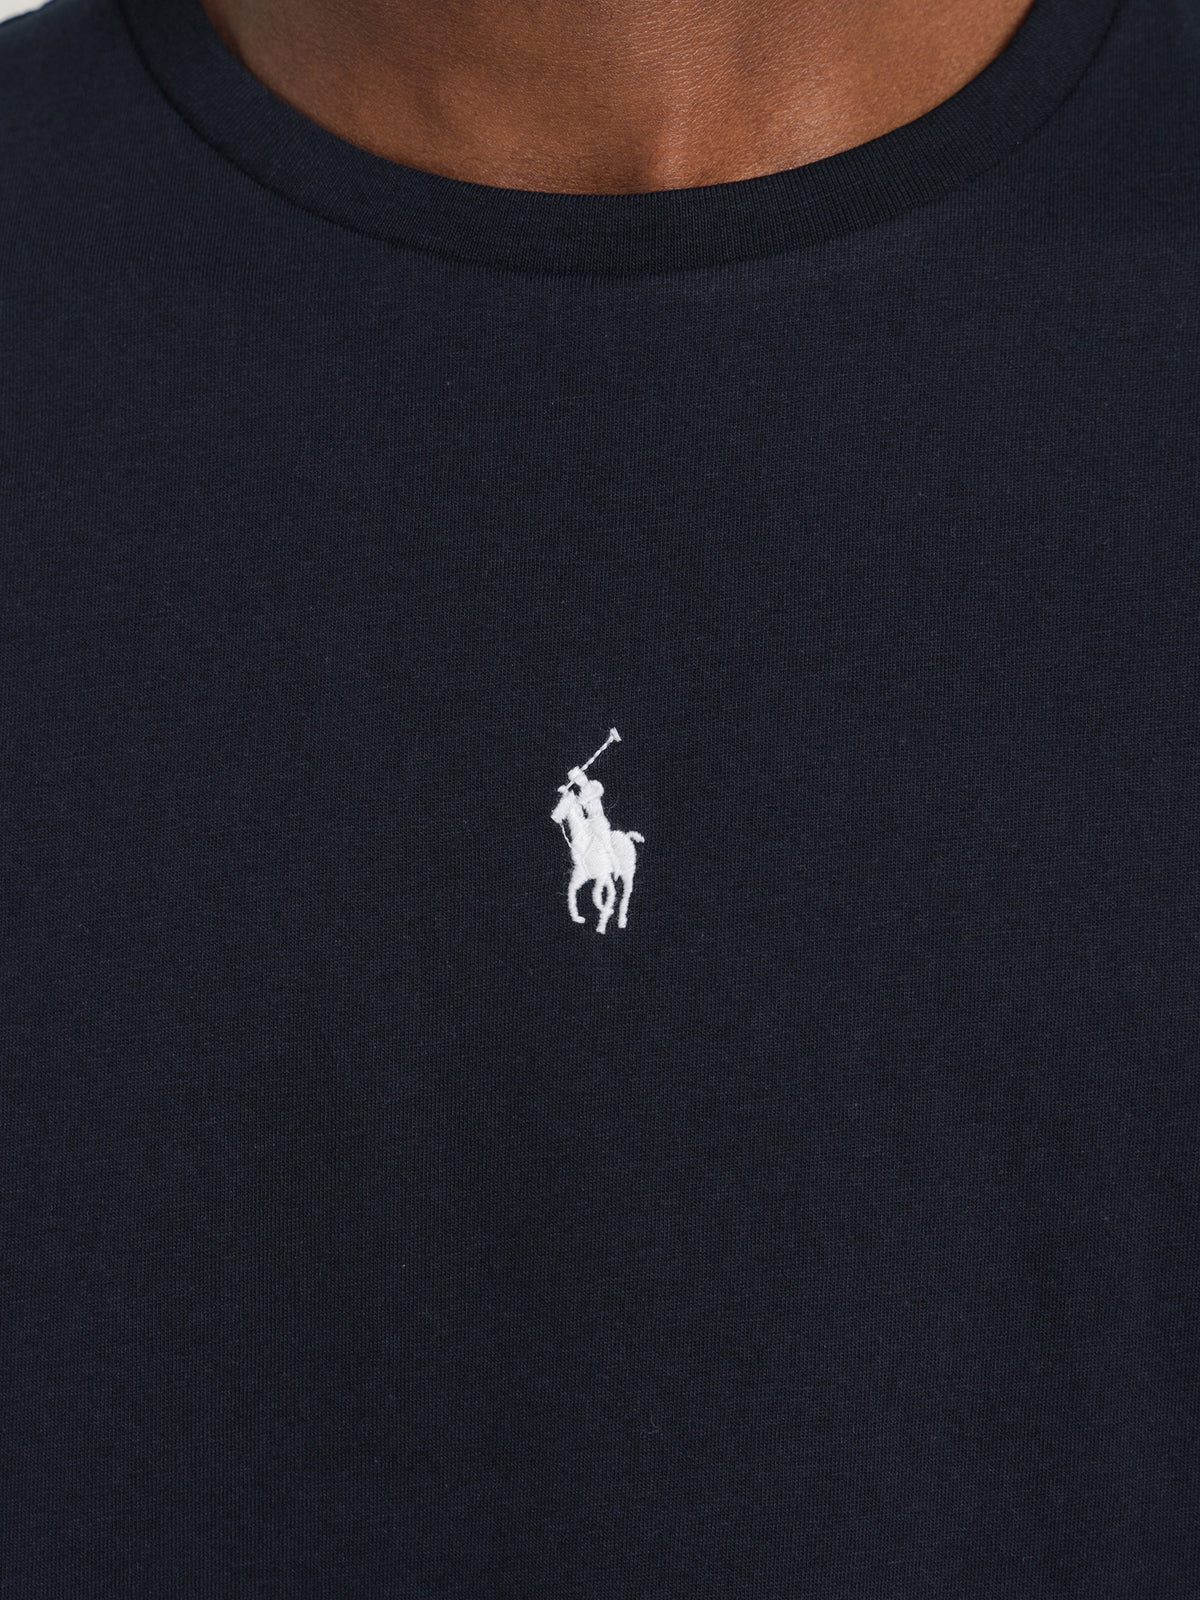 Centre Pony T-Shirt in Navy